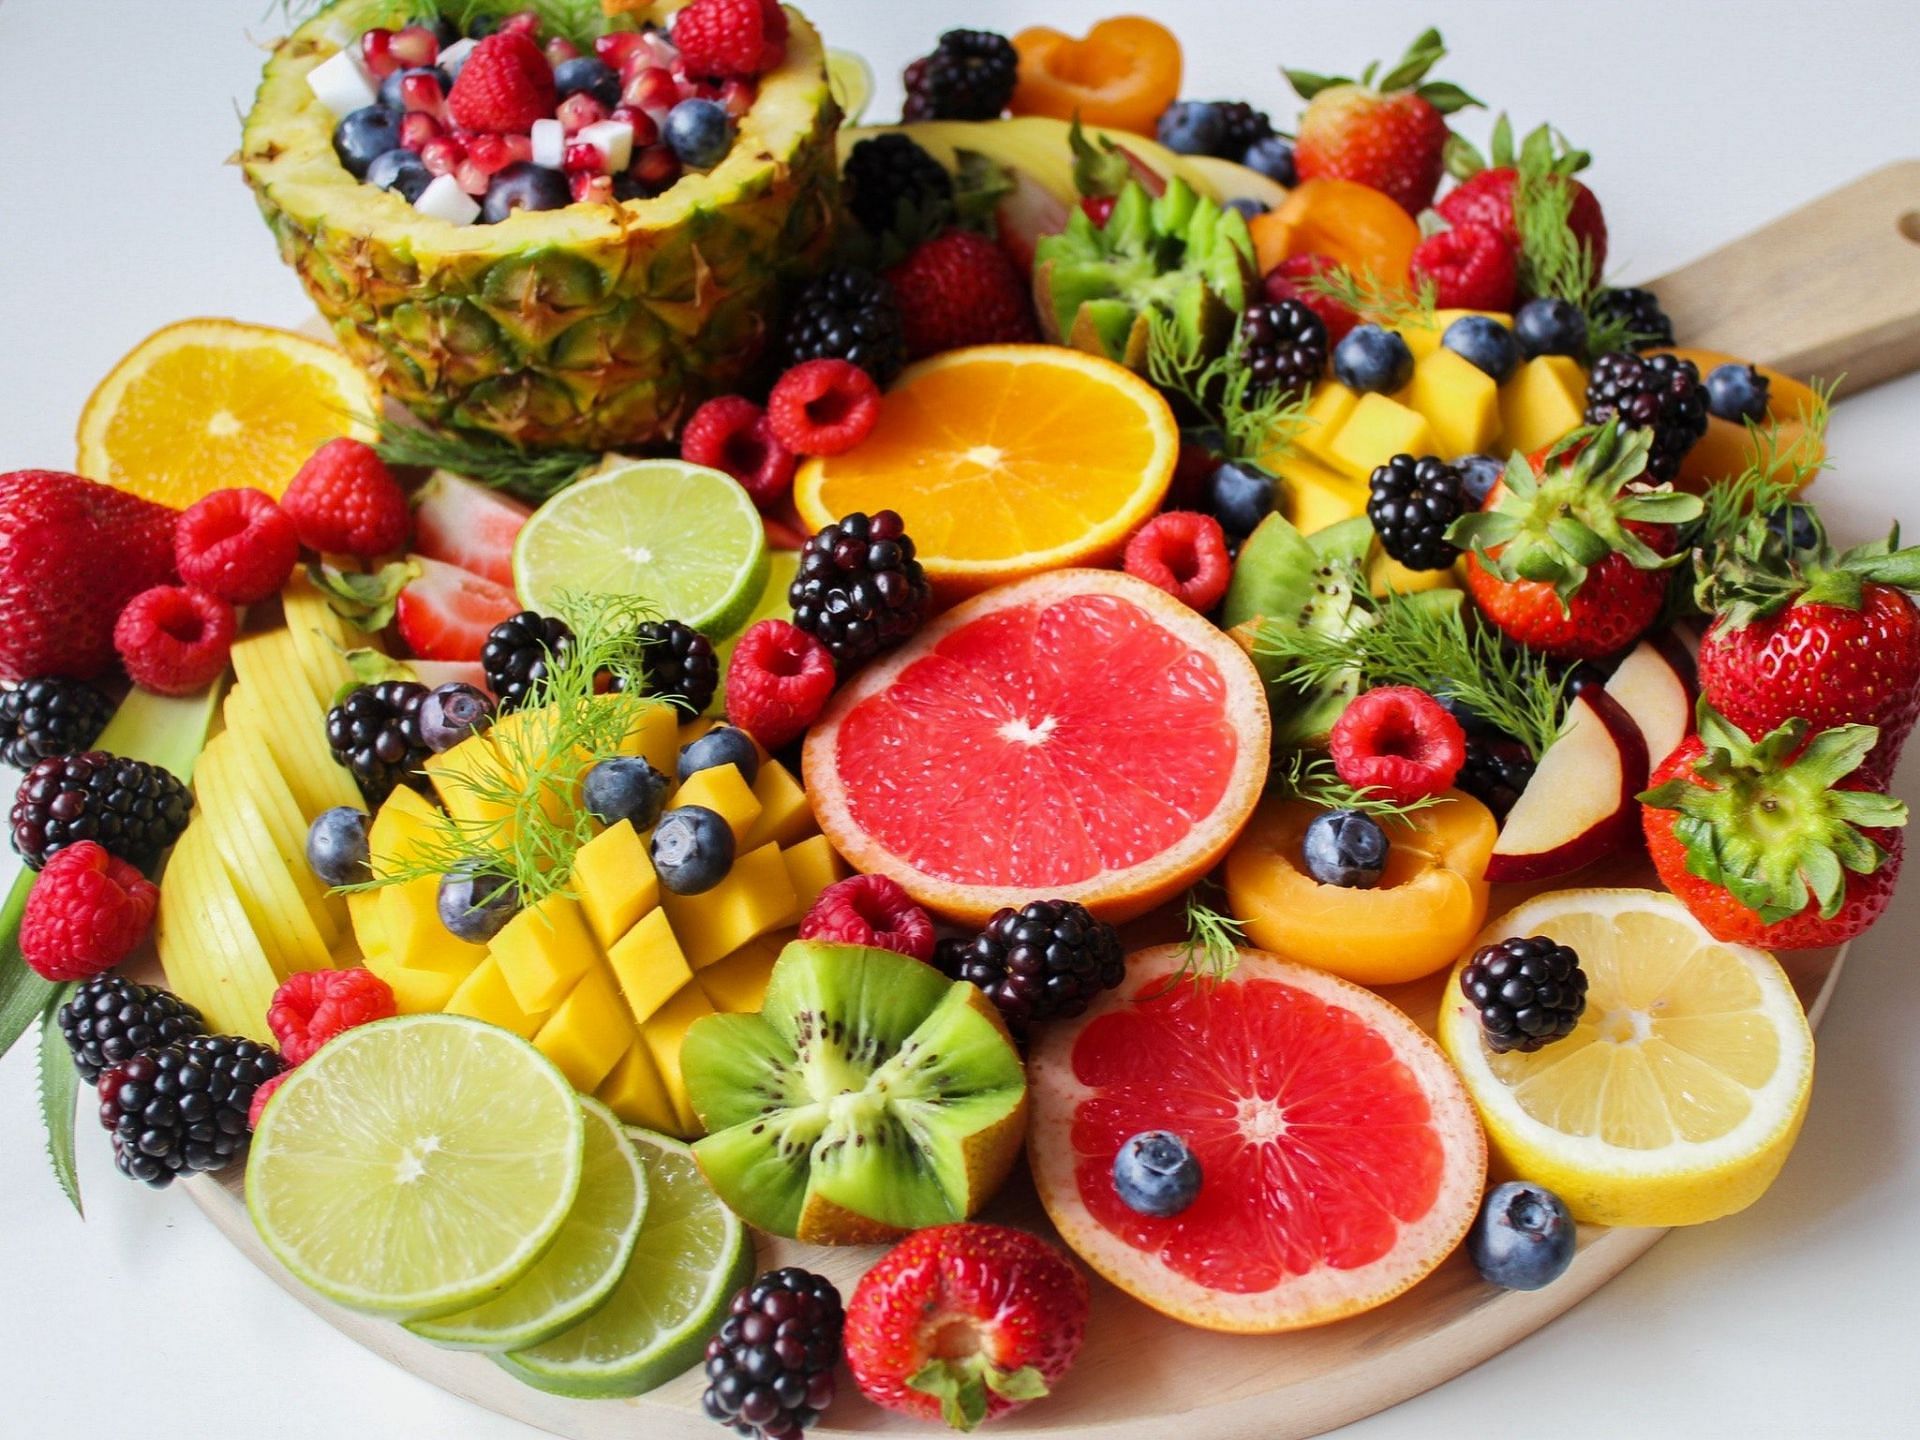 Fruits to include in this diet (image sourced via Pexels / Photo by Jane Daon)